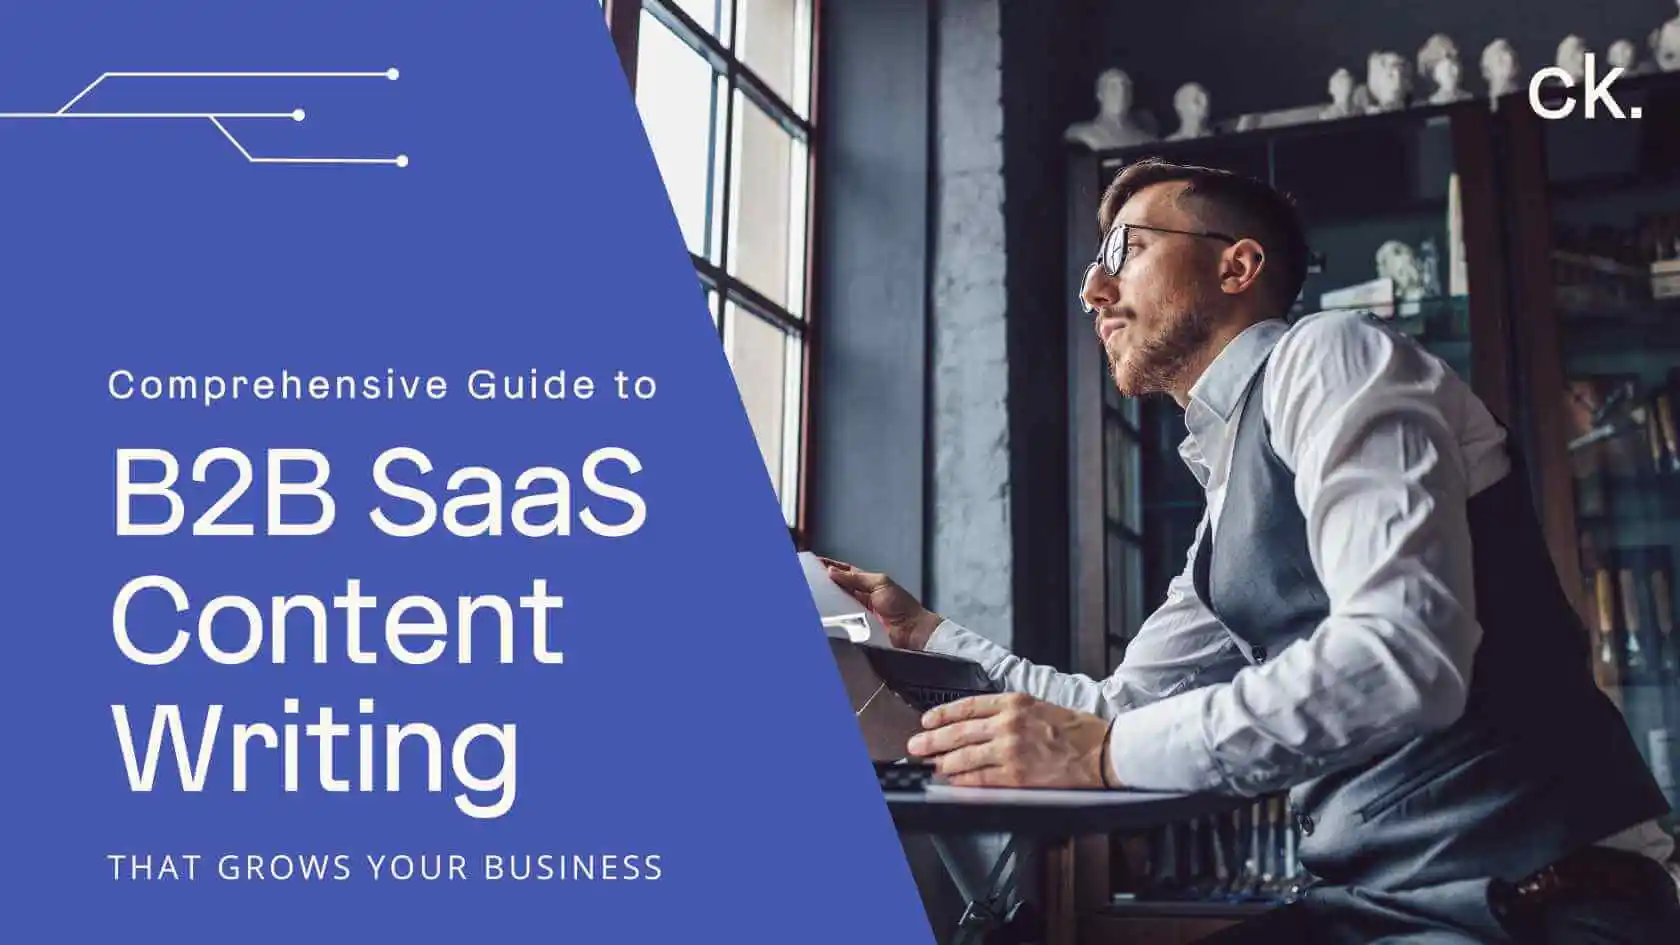 A Comprehensive Guide to Writing Compelling B2B SaaS Content